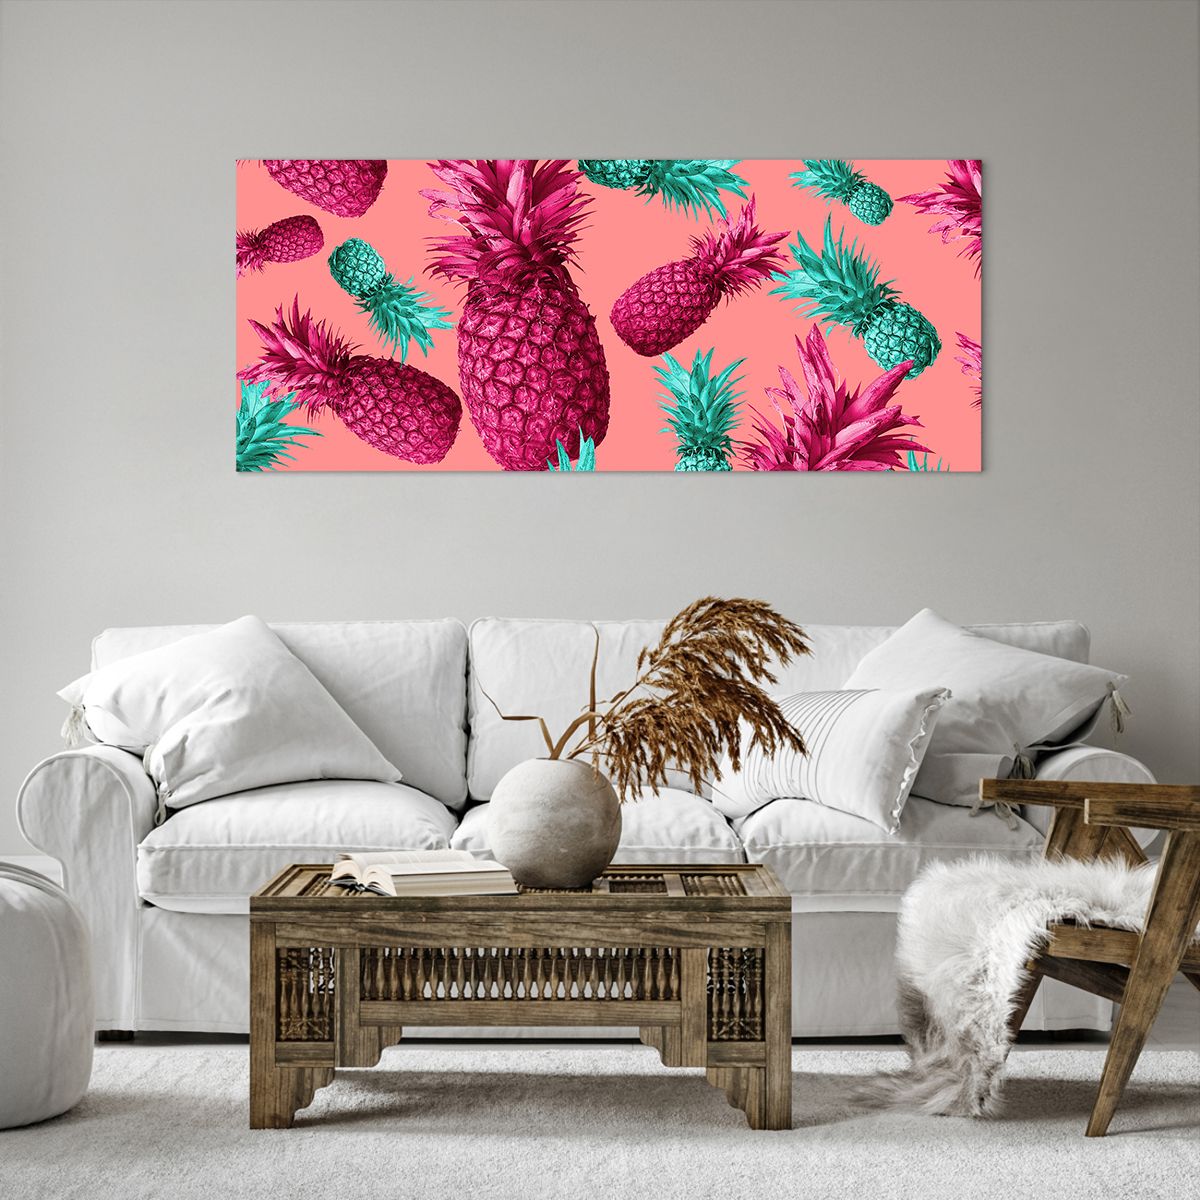 Impression sur toile Abstraction, Impression sur toile Ananas, Impression sur toile Art, Impression sur toile Fruit, Impression sur toile Cuisine